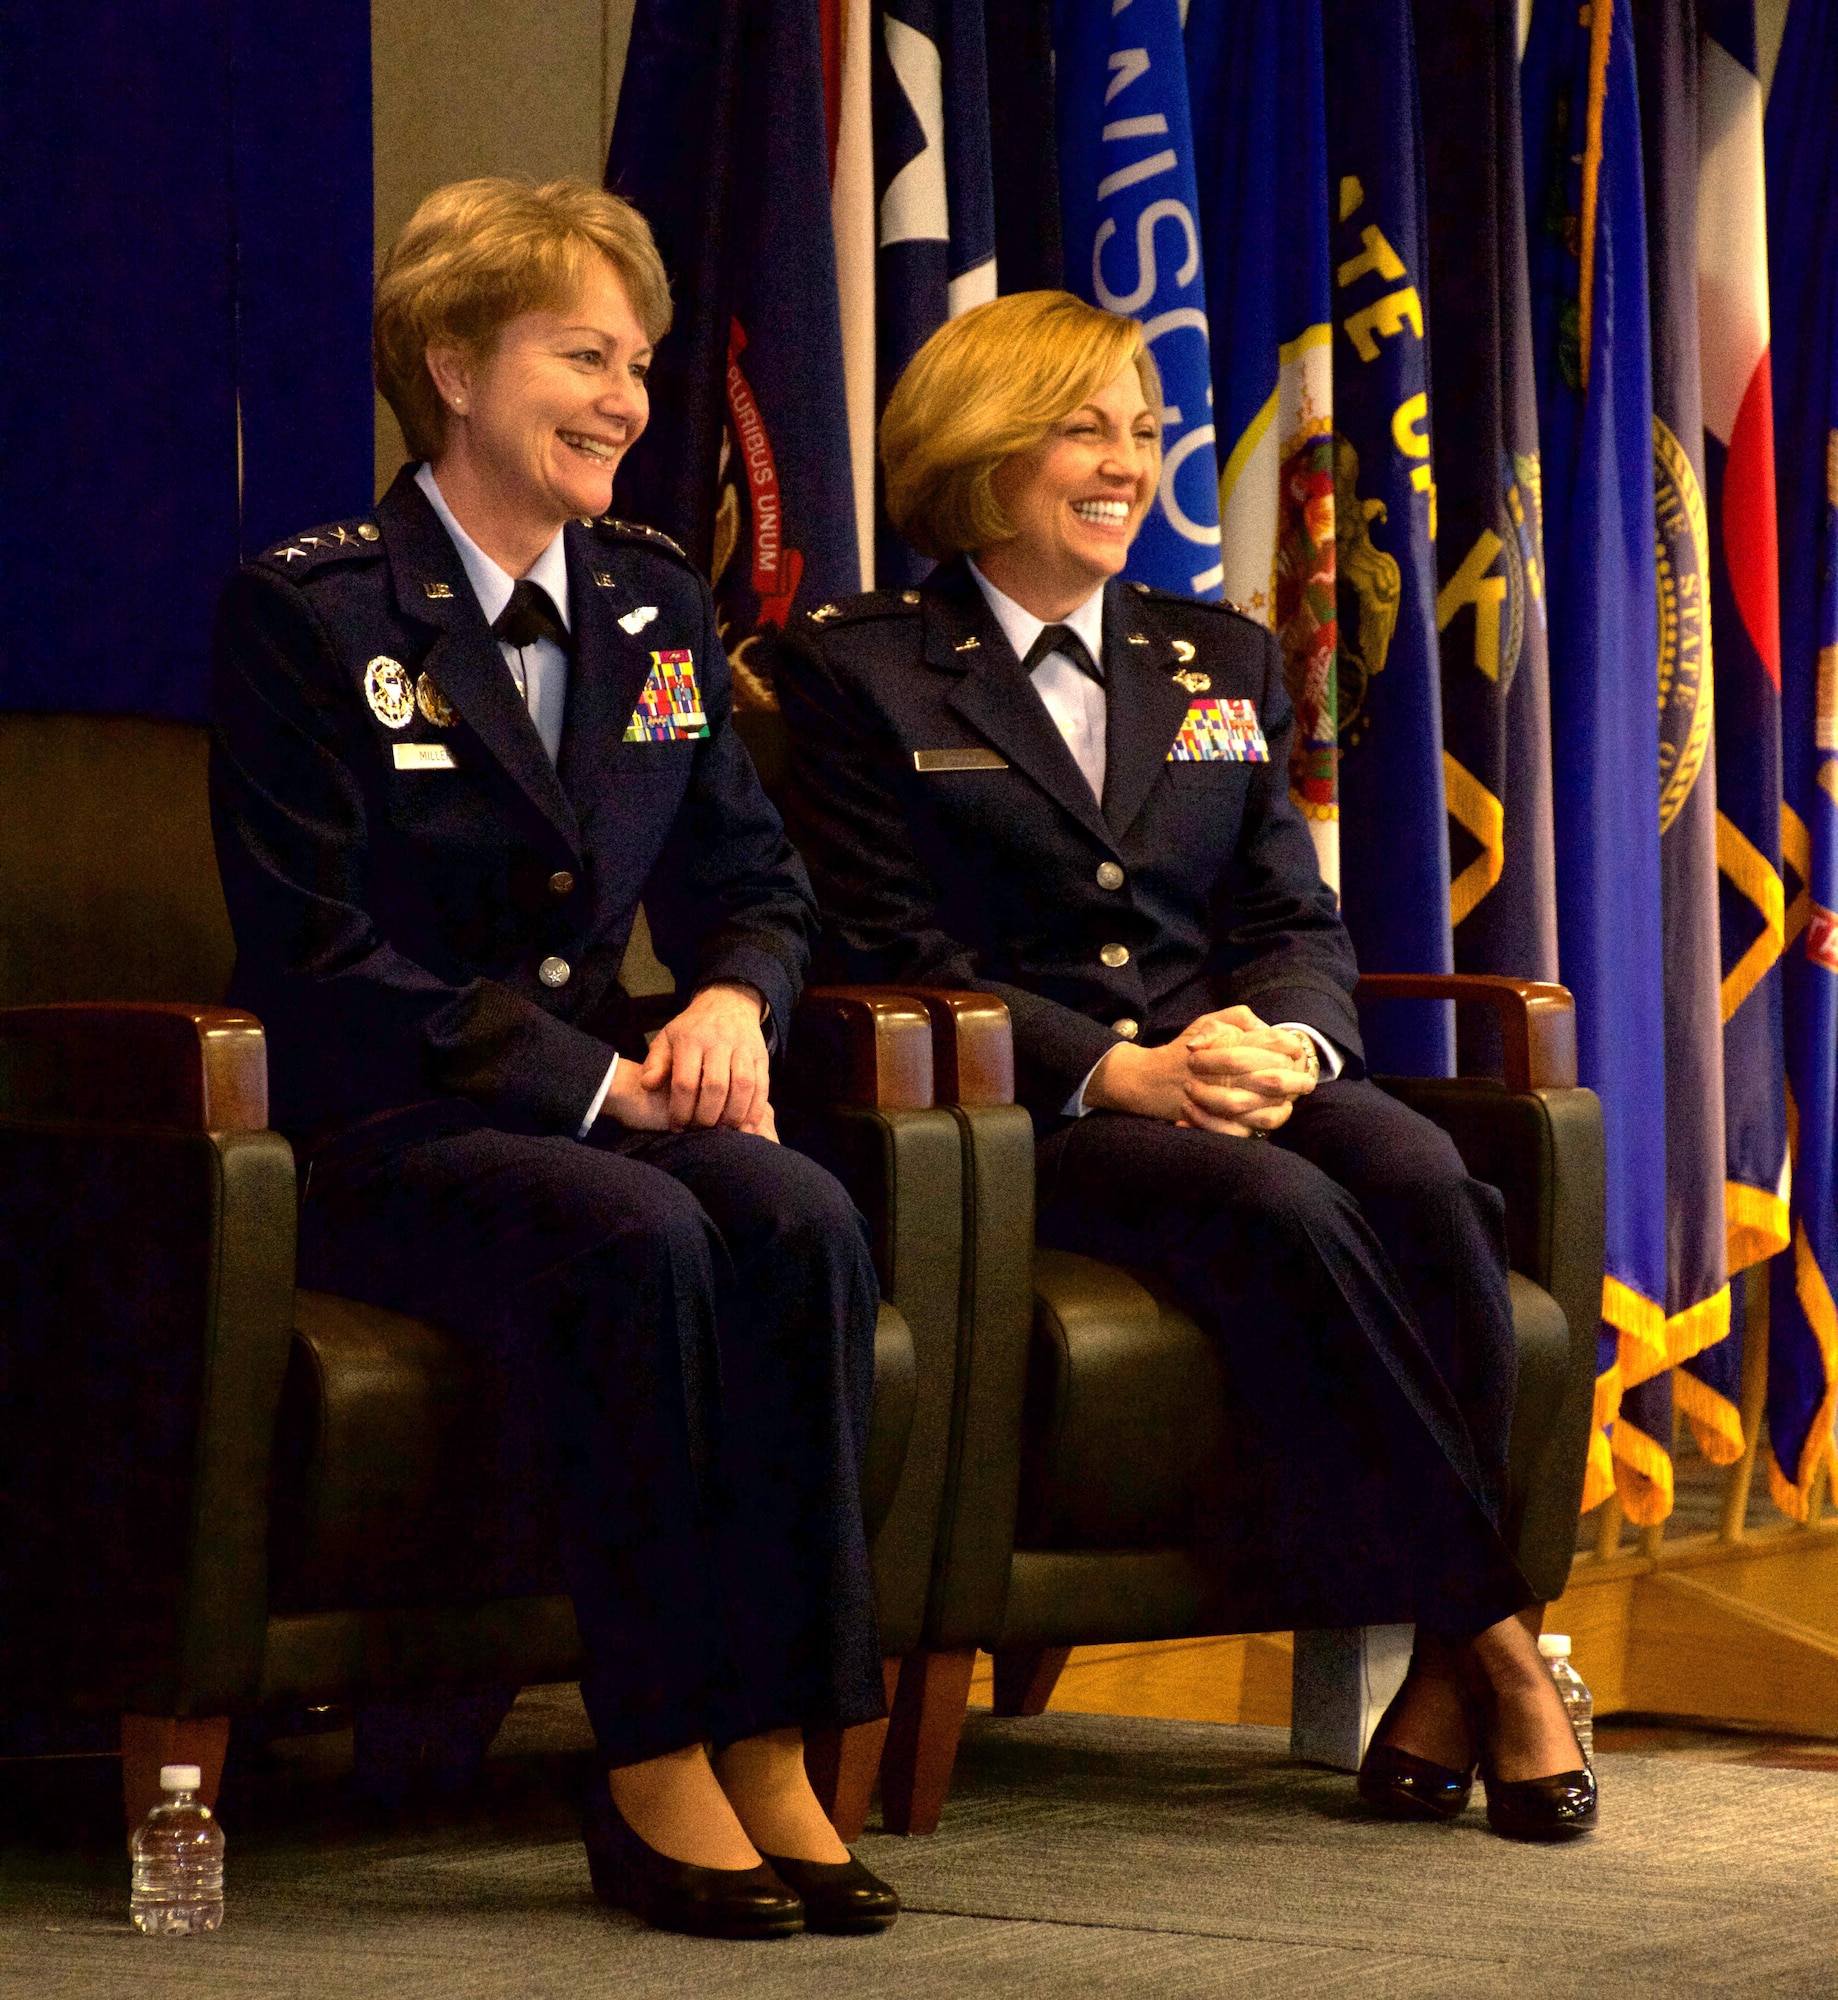 Lt. Gen. Maryanne Miller (left), Chief of Air Force Reserve and Commander, Air Force Reserve Command, and Brig. Gen. Ellen Moore (right), Commander, Air Reserve Personnel Center, smile during Moore's promotion ceremony Jan. 27, 2017, at Buckley Air Force Base, Colo. Moore is the first female brigadier general of ARPC. (U.S. Air Force photo by Master Sgt. Rick Grybos)